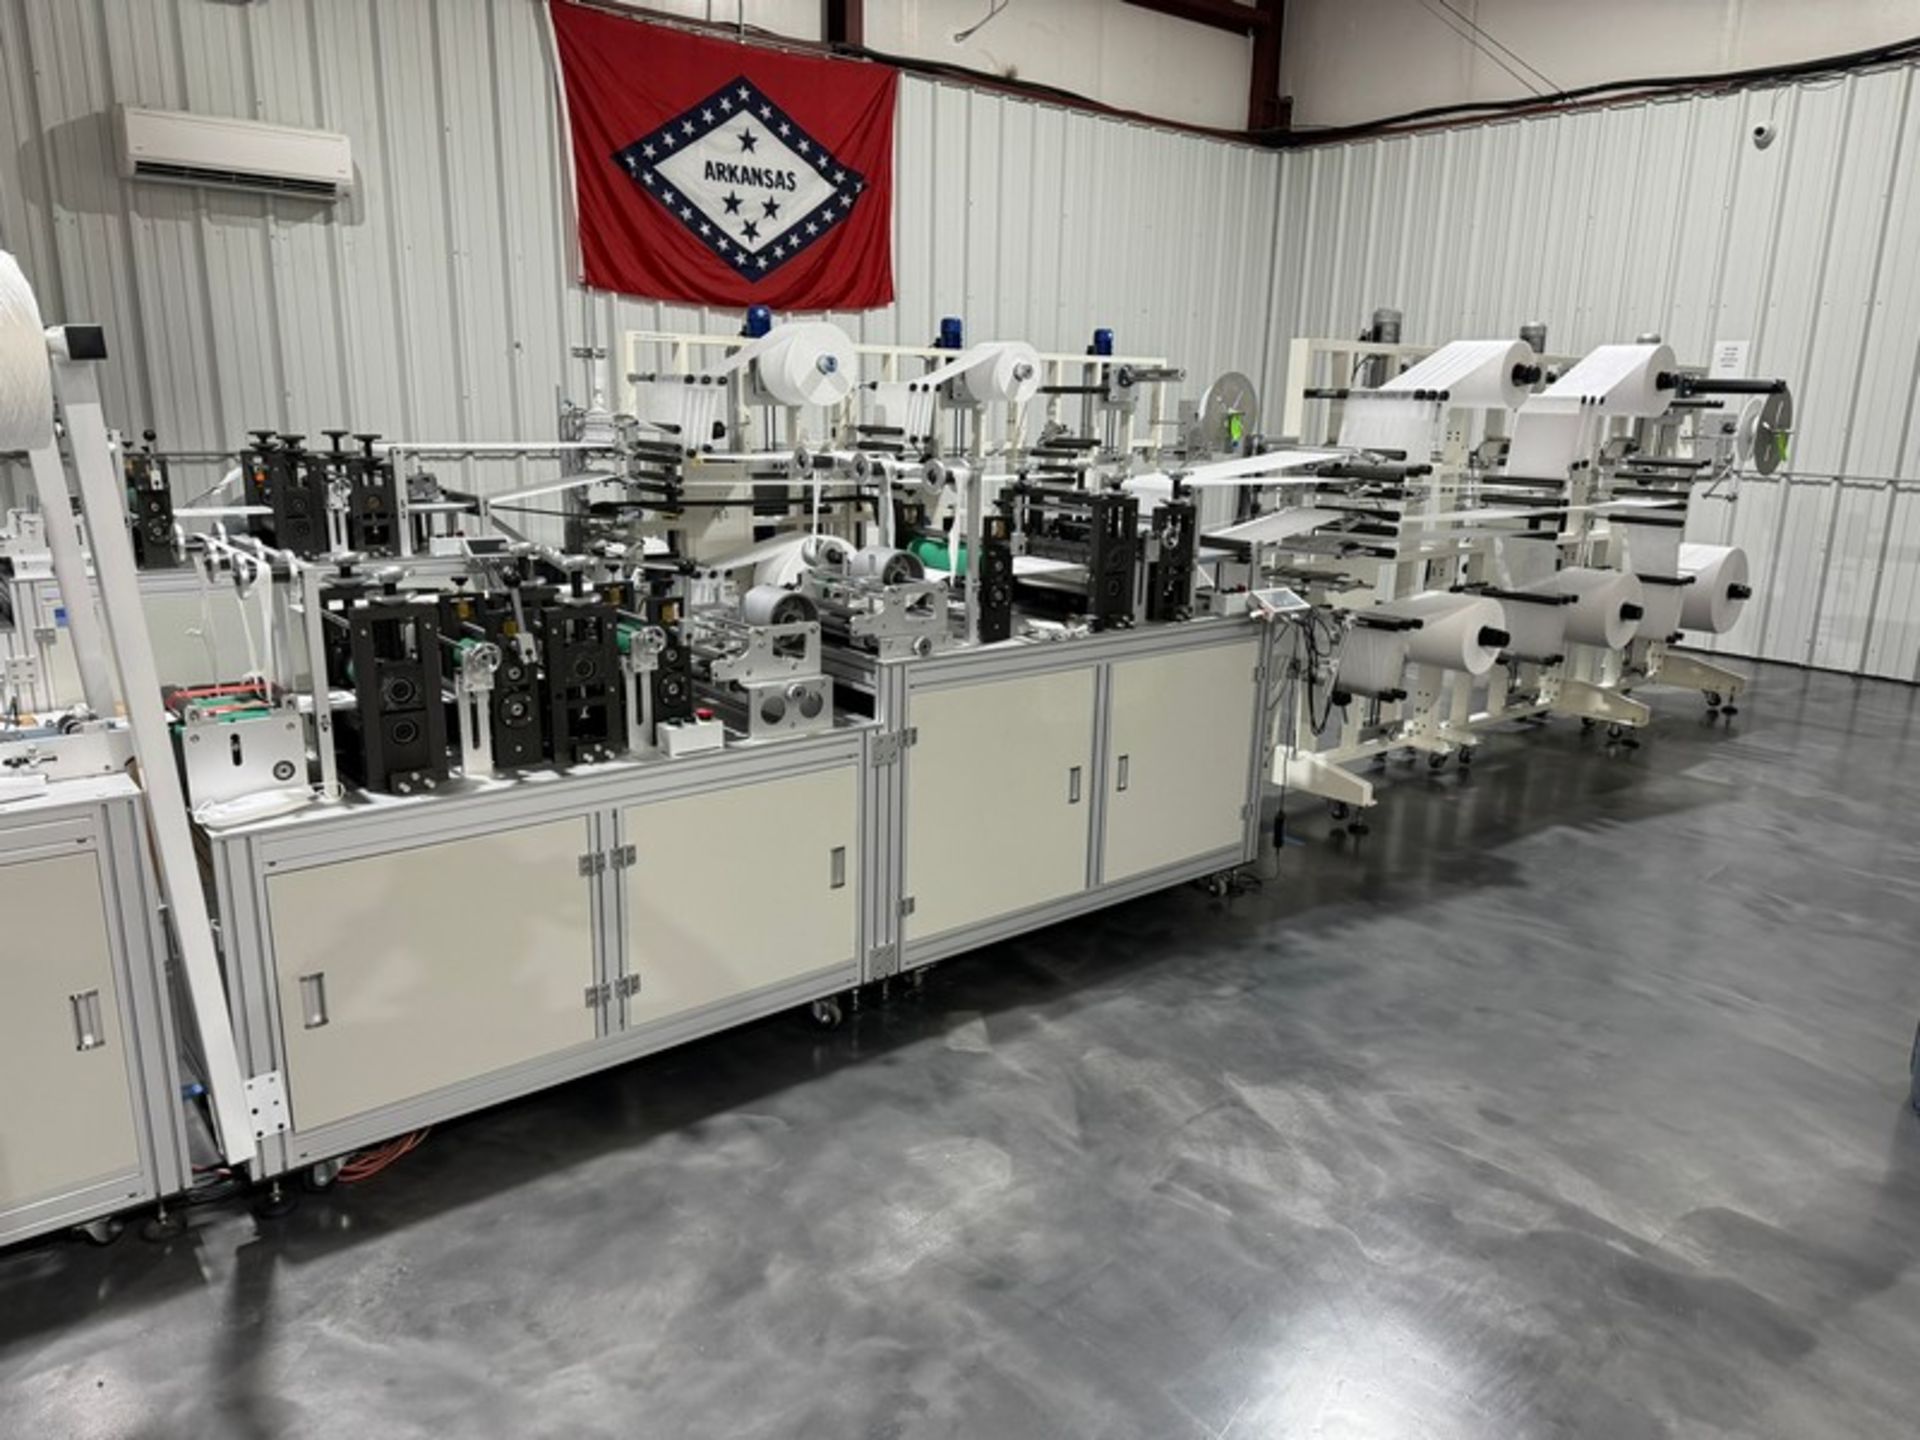 2022 KYD Automatic 6,000 Units Per Hour Mask Manufacturing Line, Includes Unwinding Station, Rolling - Image 3 of 30